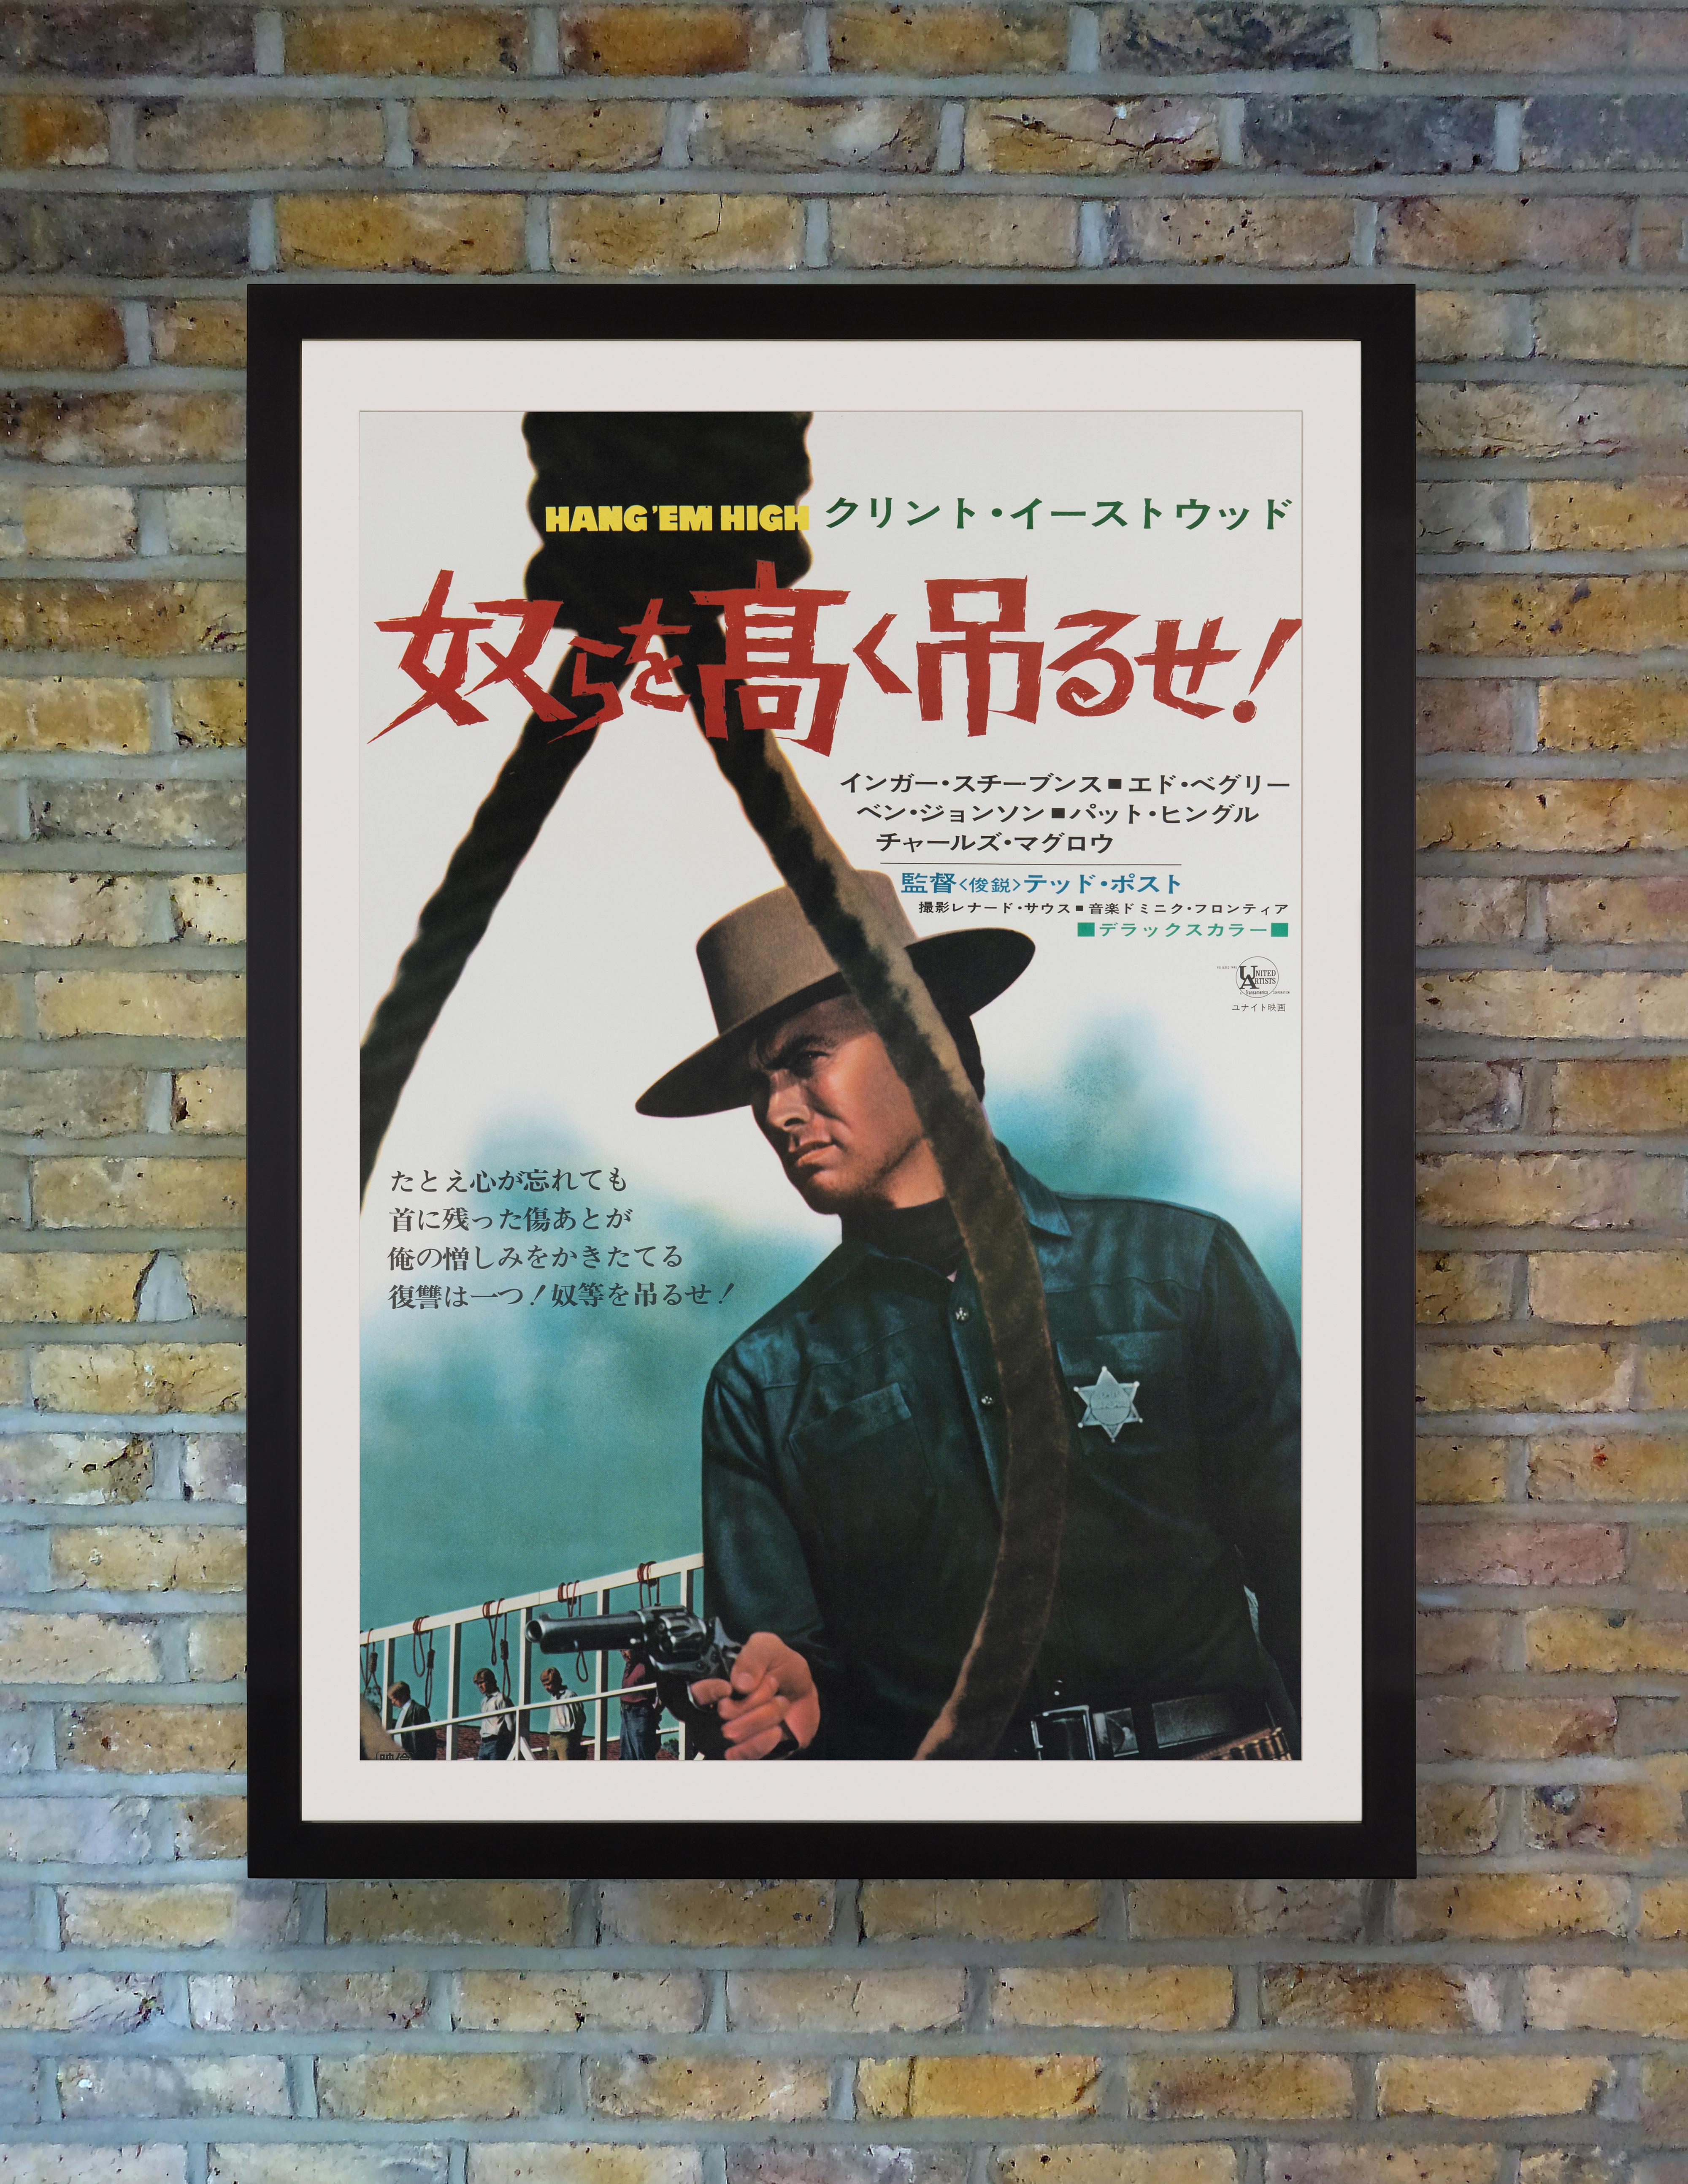 A steely Clint Eastwood dominates as a vengeful lawman fighting to bring down the vigilante lynch mob who left him for dead on this atmospheric B2 poster for the original Japanese release of Hollywood Western 'Hang 'Em High' in 1968. Eastwood's